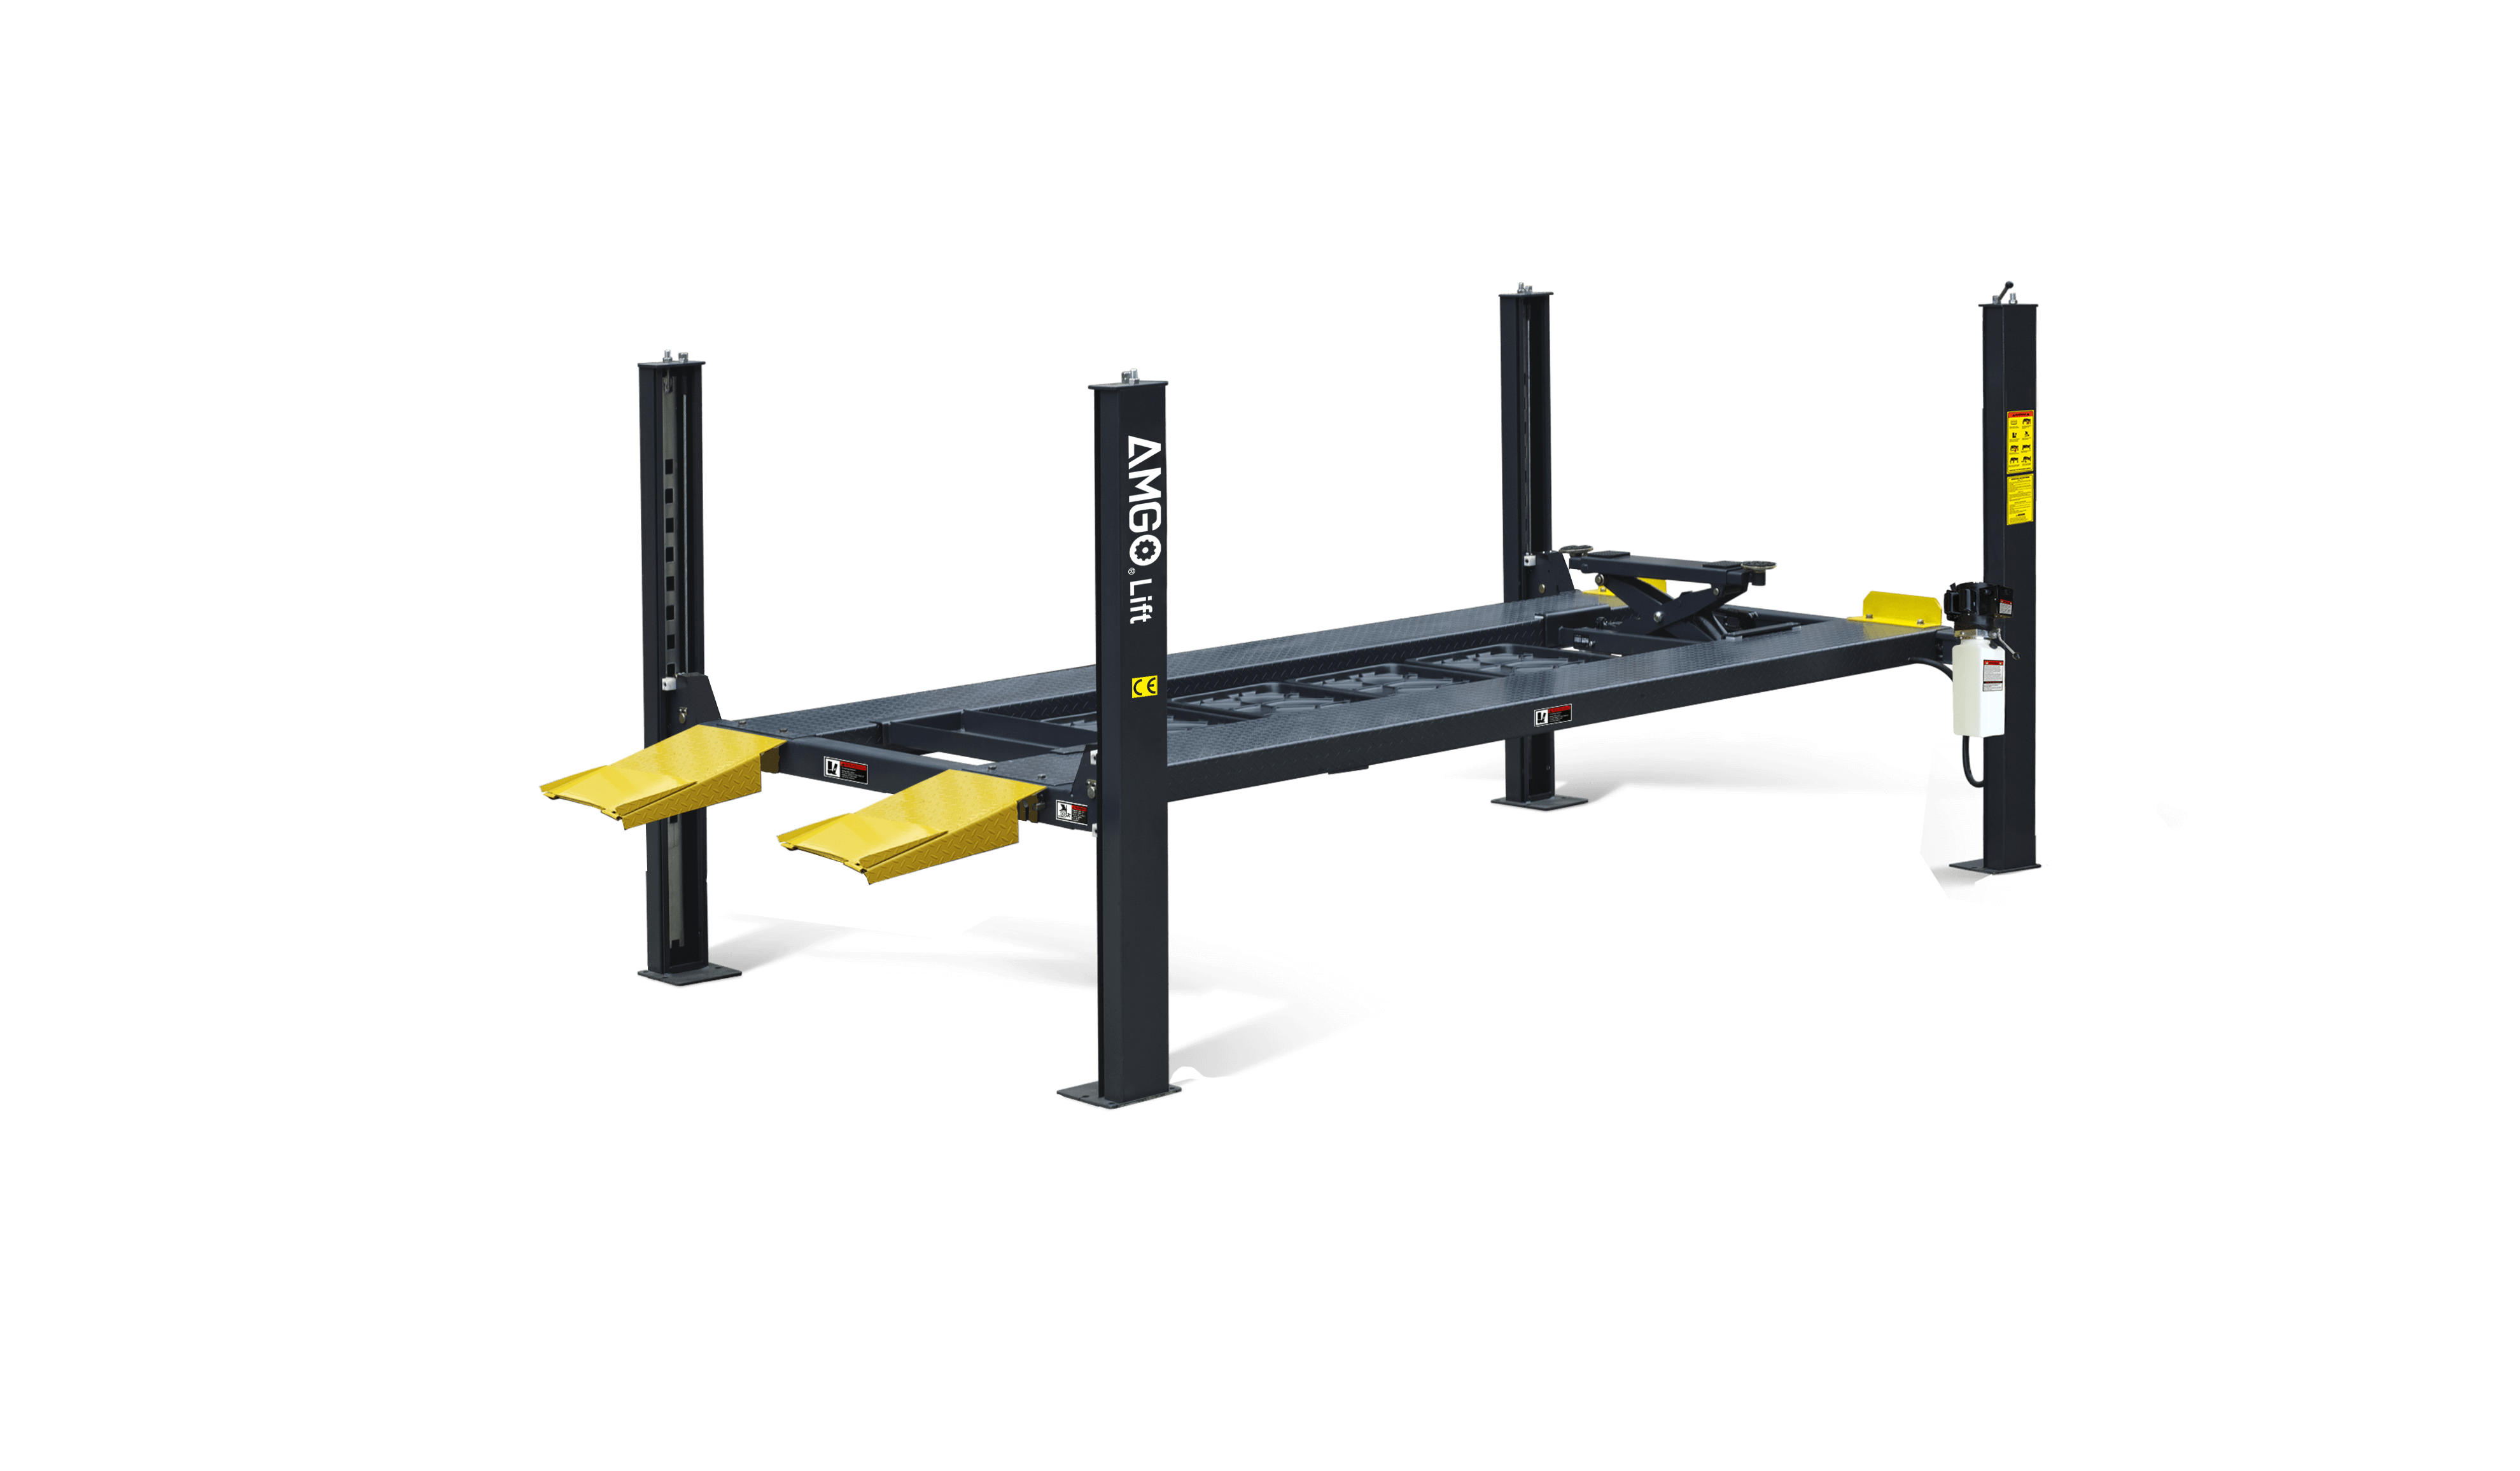 4-Post Parking Lift » Toolwarehouse » Buy Tools Online